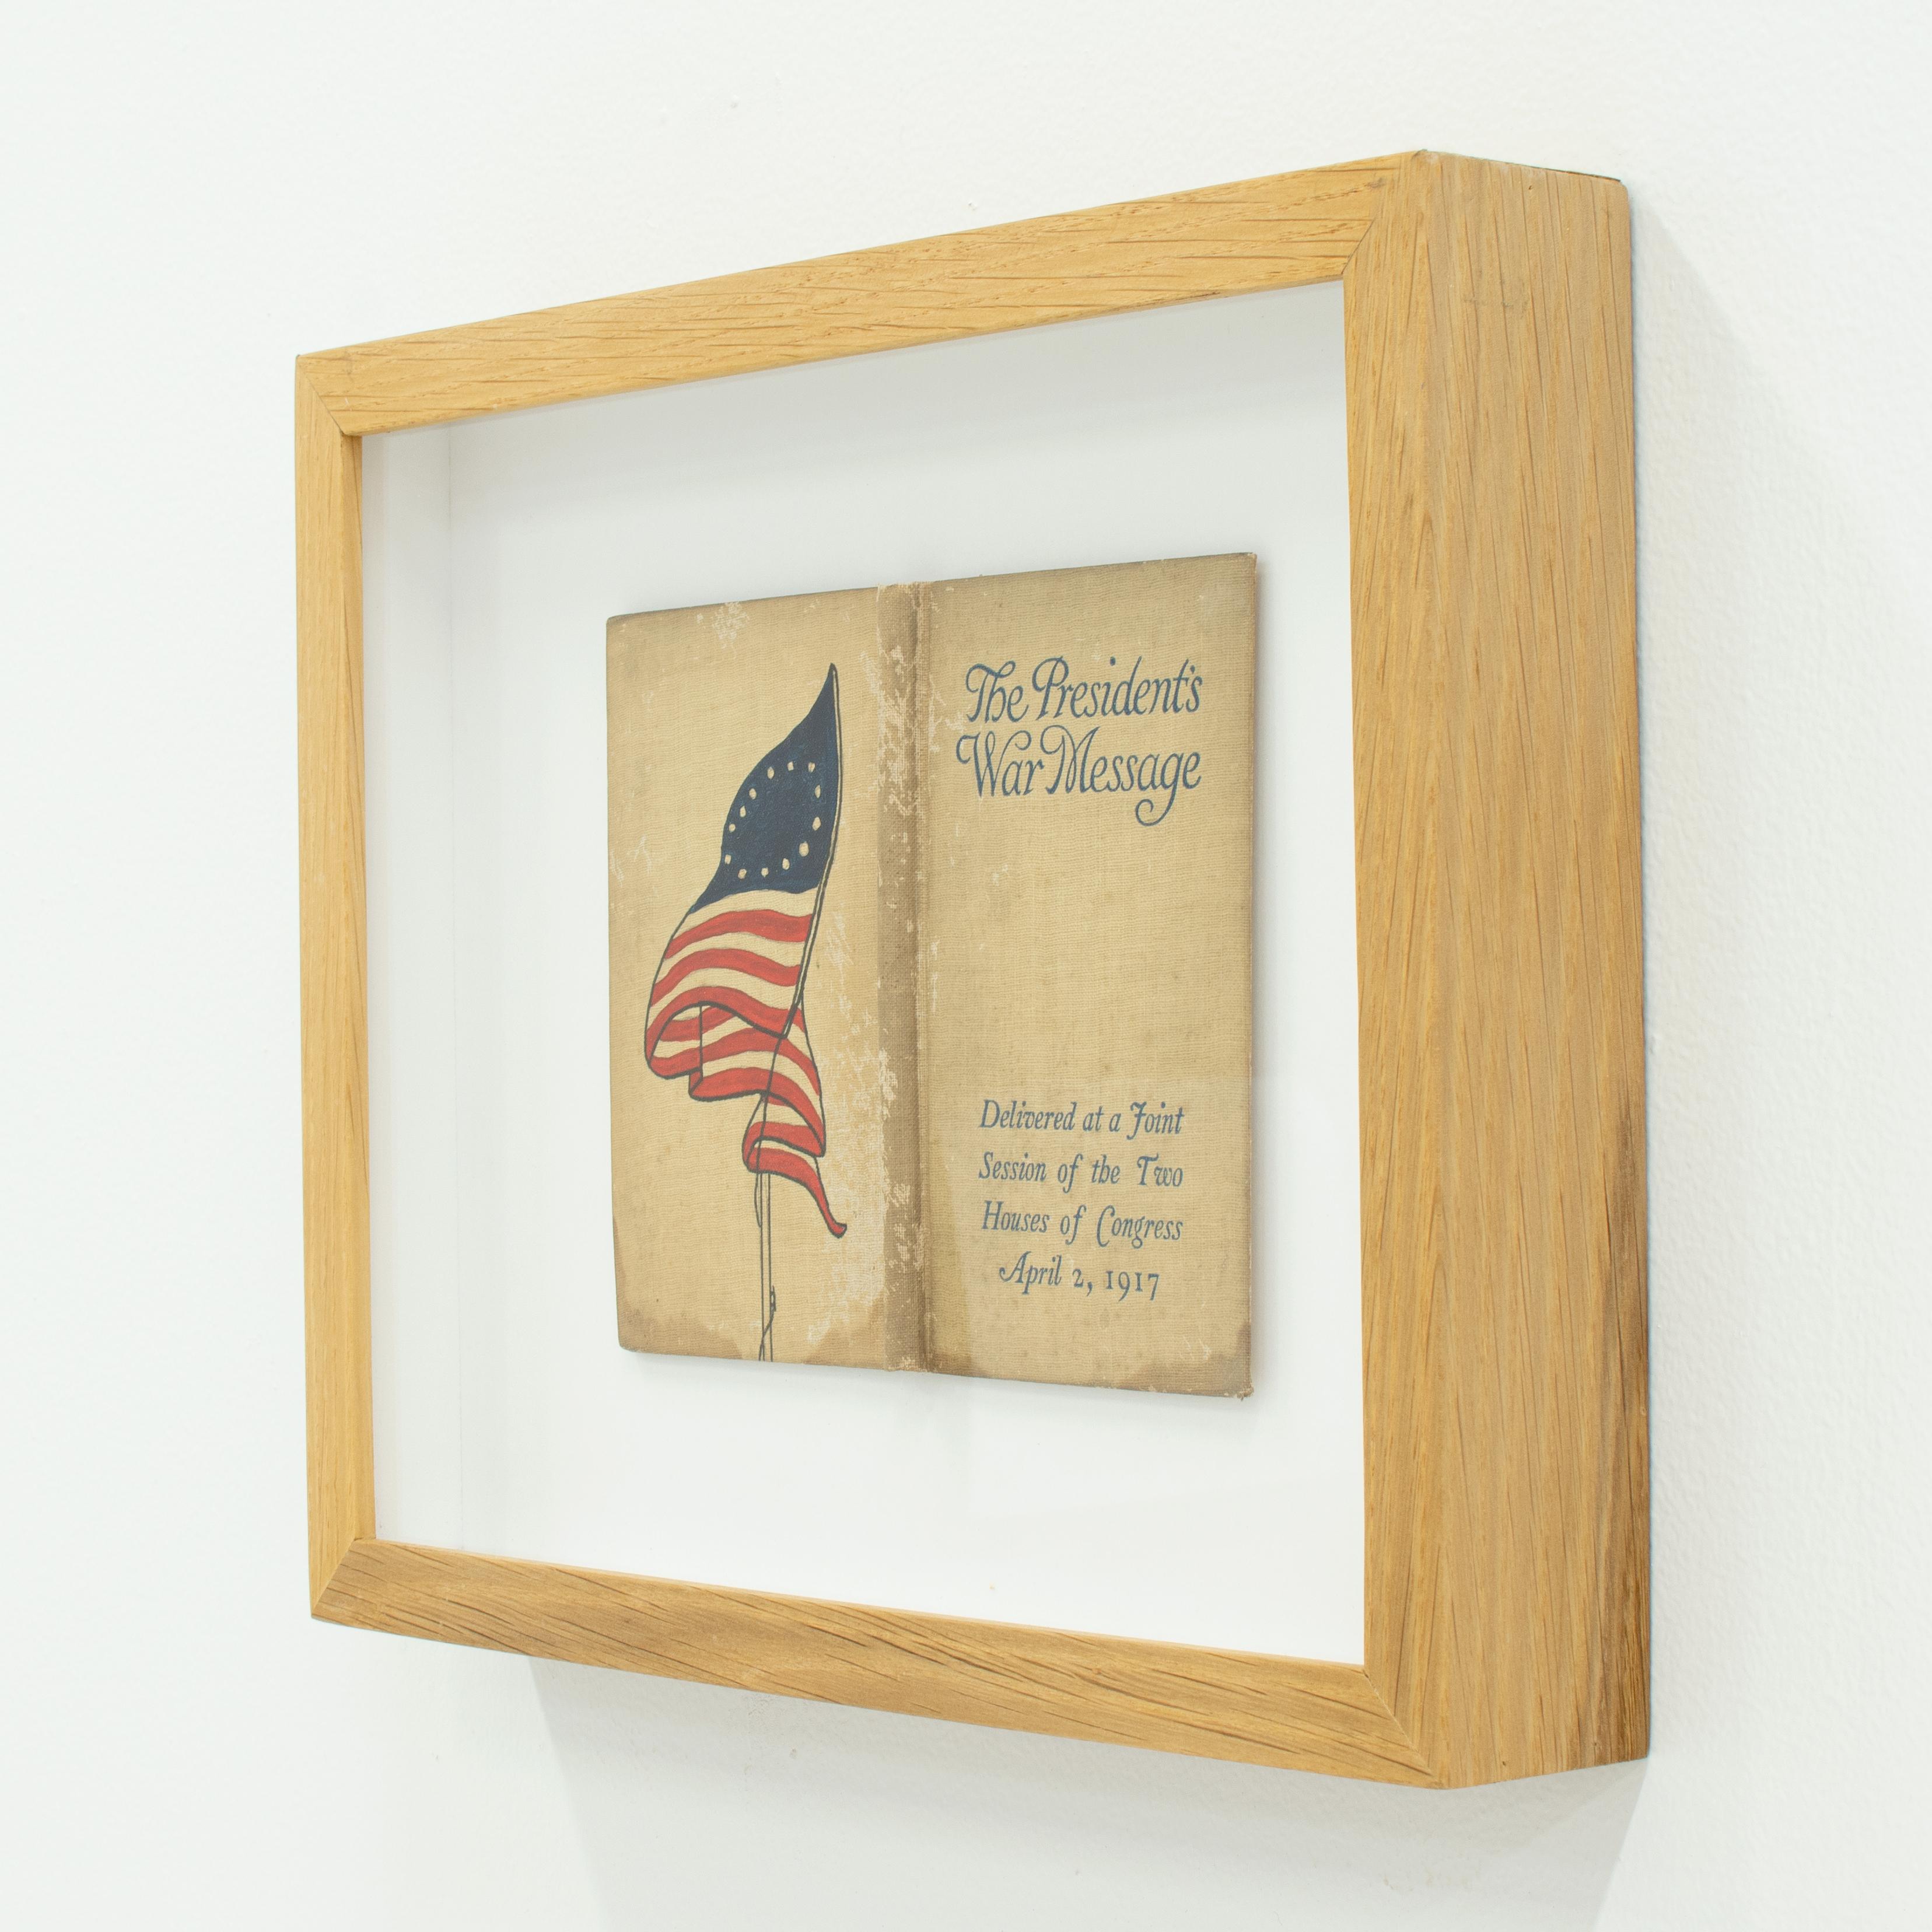 The President's War Message - abstract book art mixed media in handmade frame For Sale 1